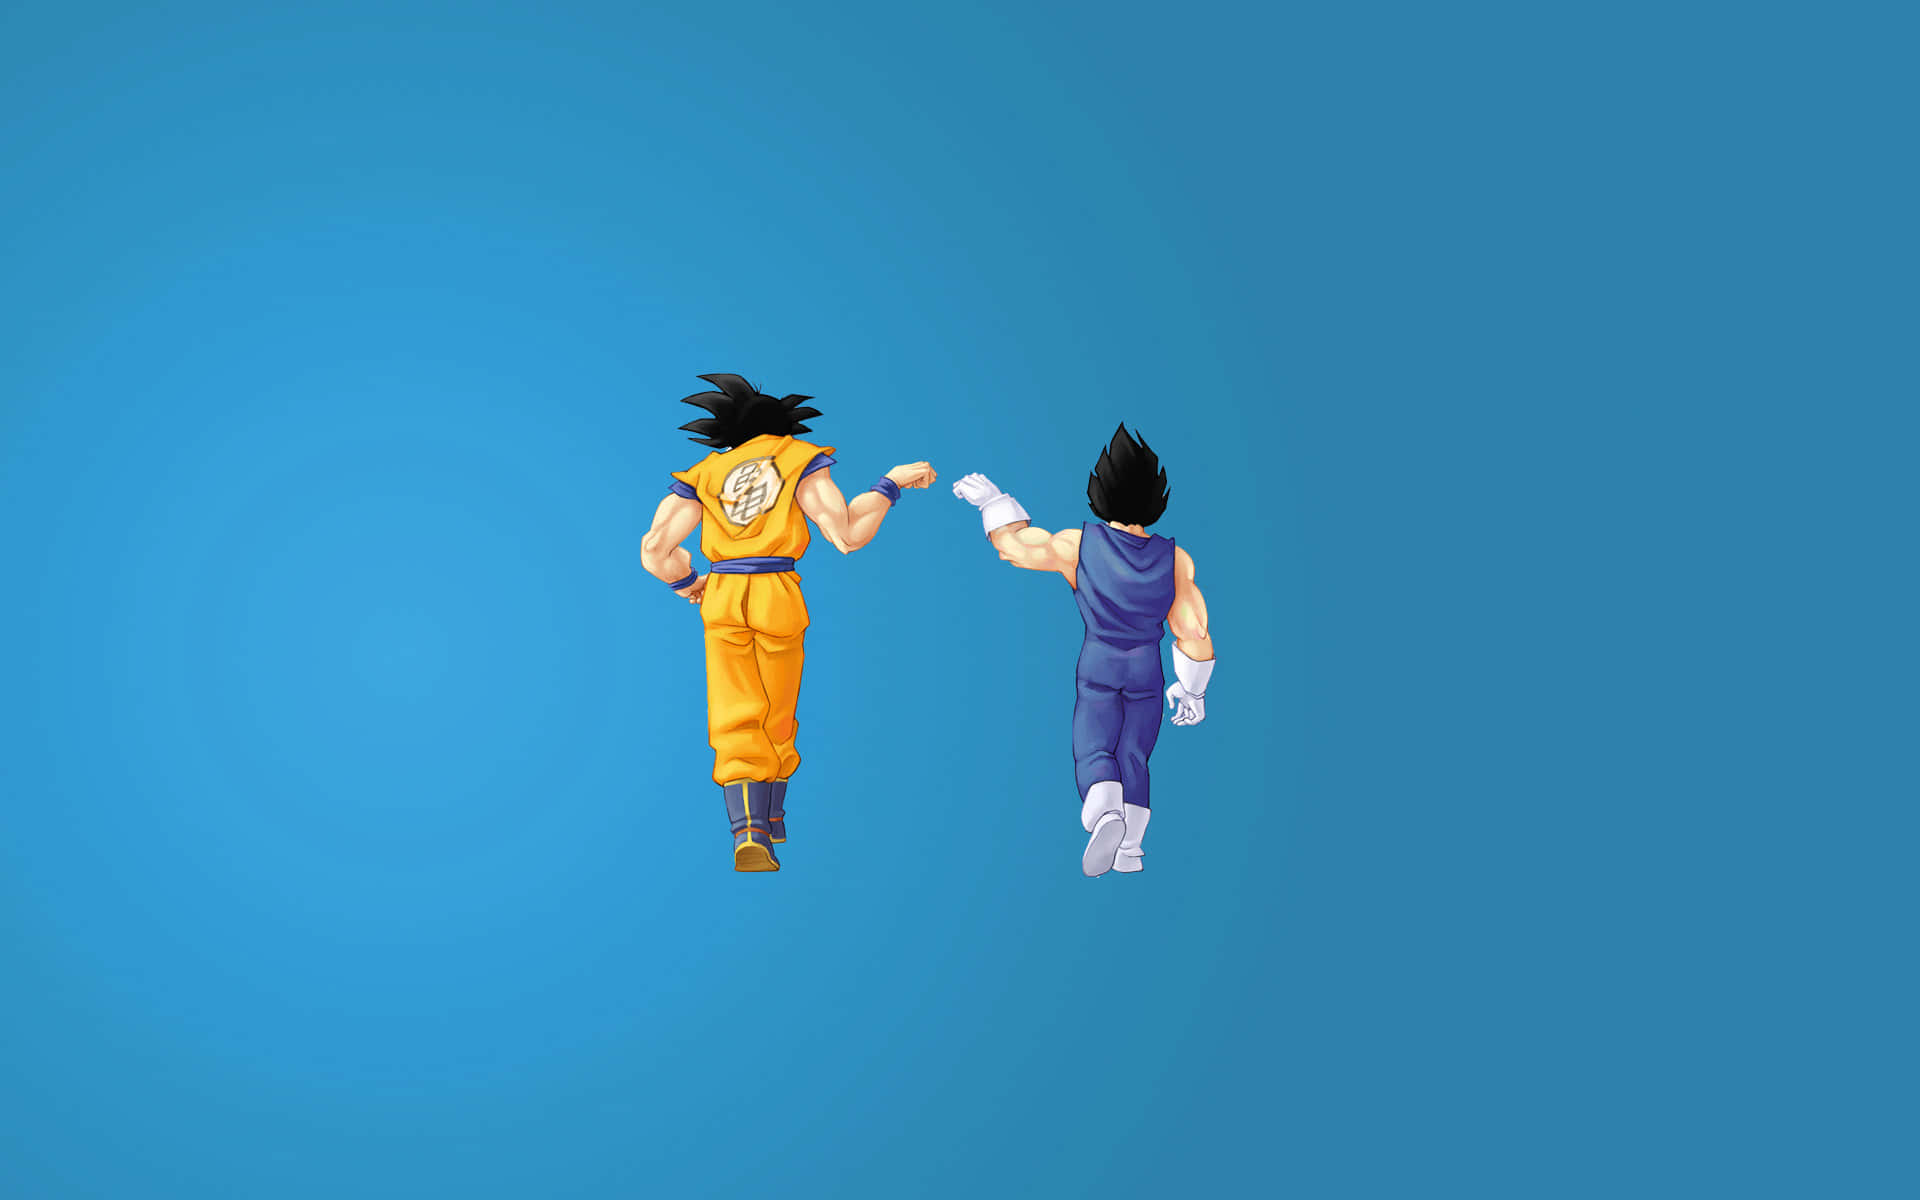 Feel the power of Saiyans with this Goku and Vegeta iPhone Wallpaper